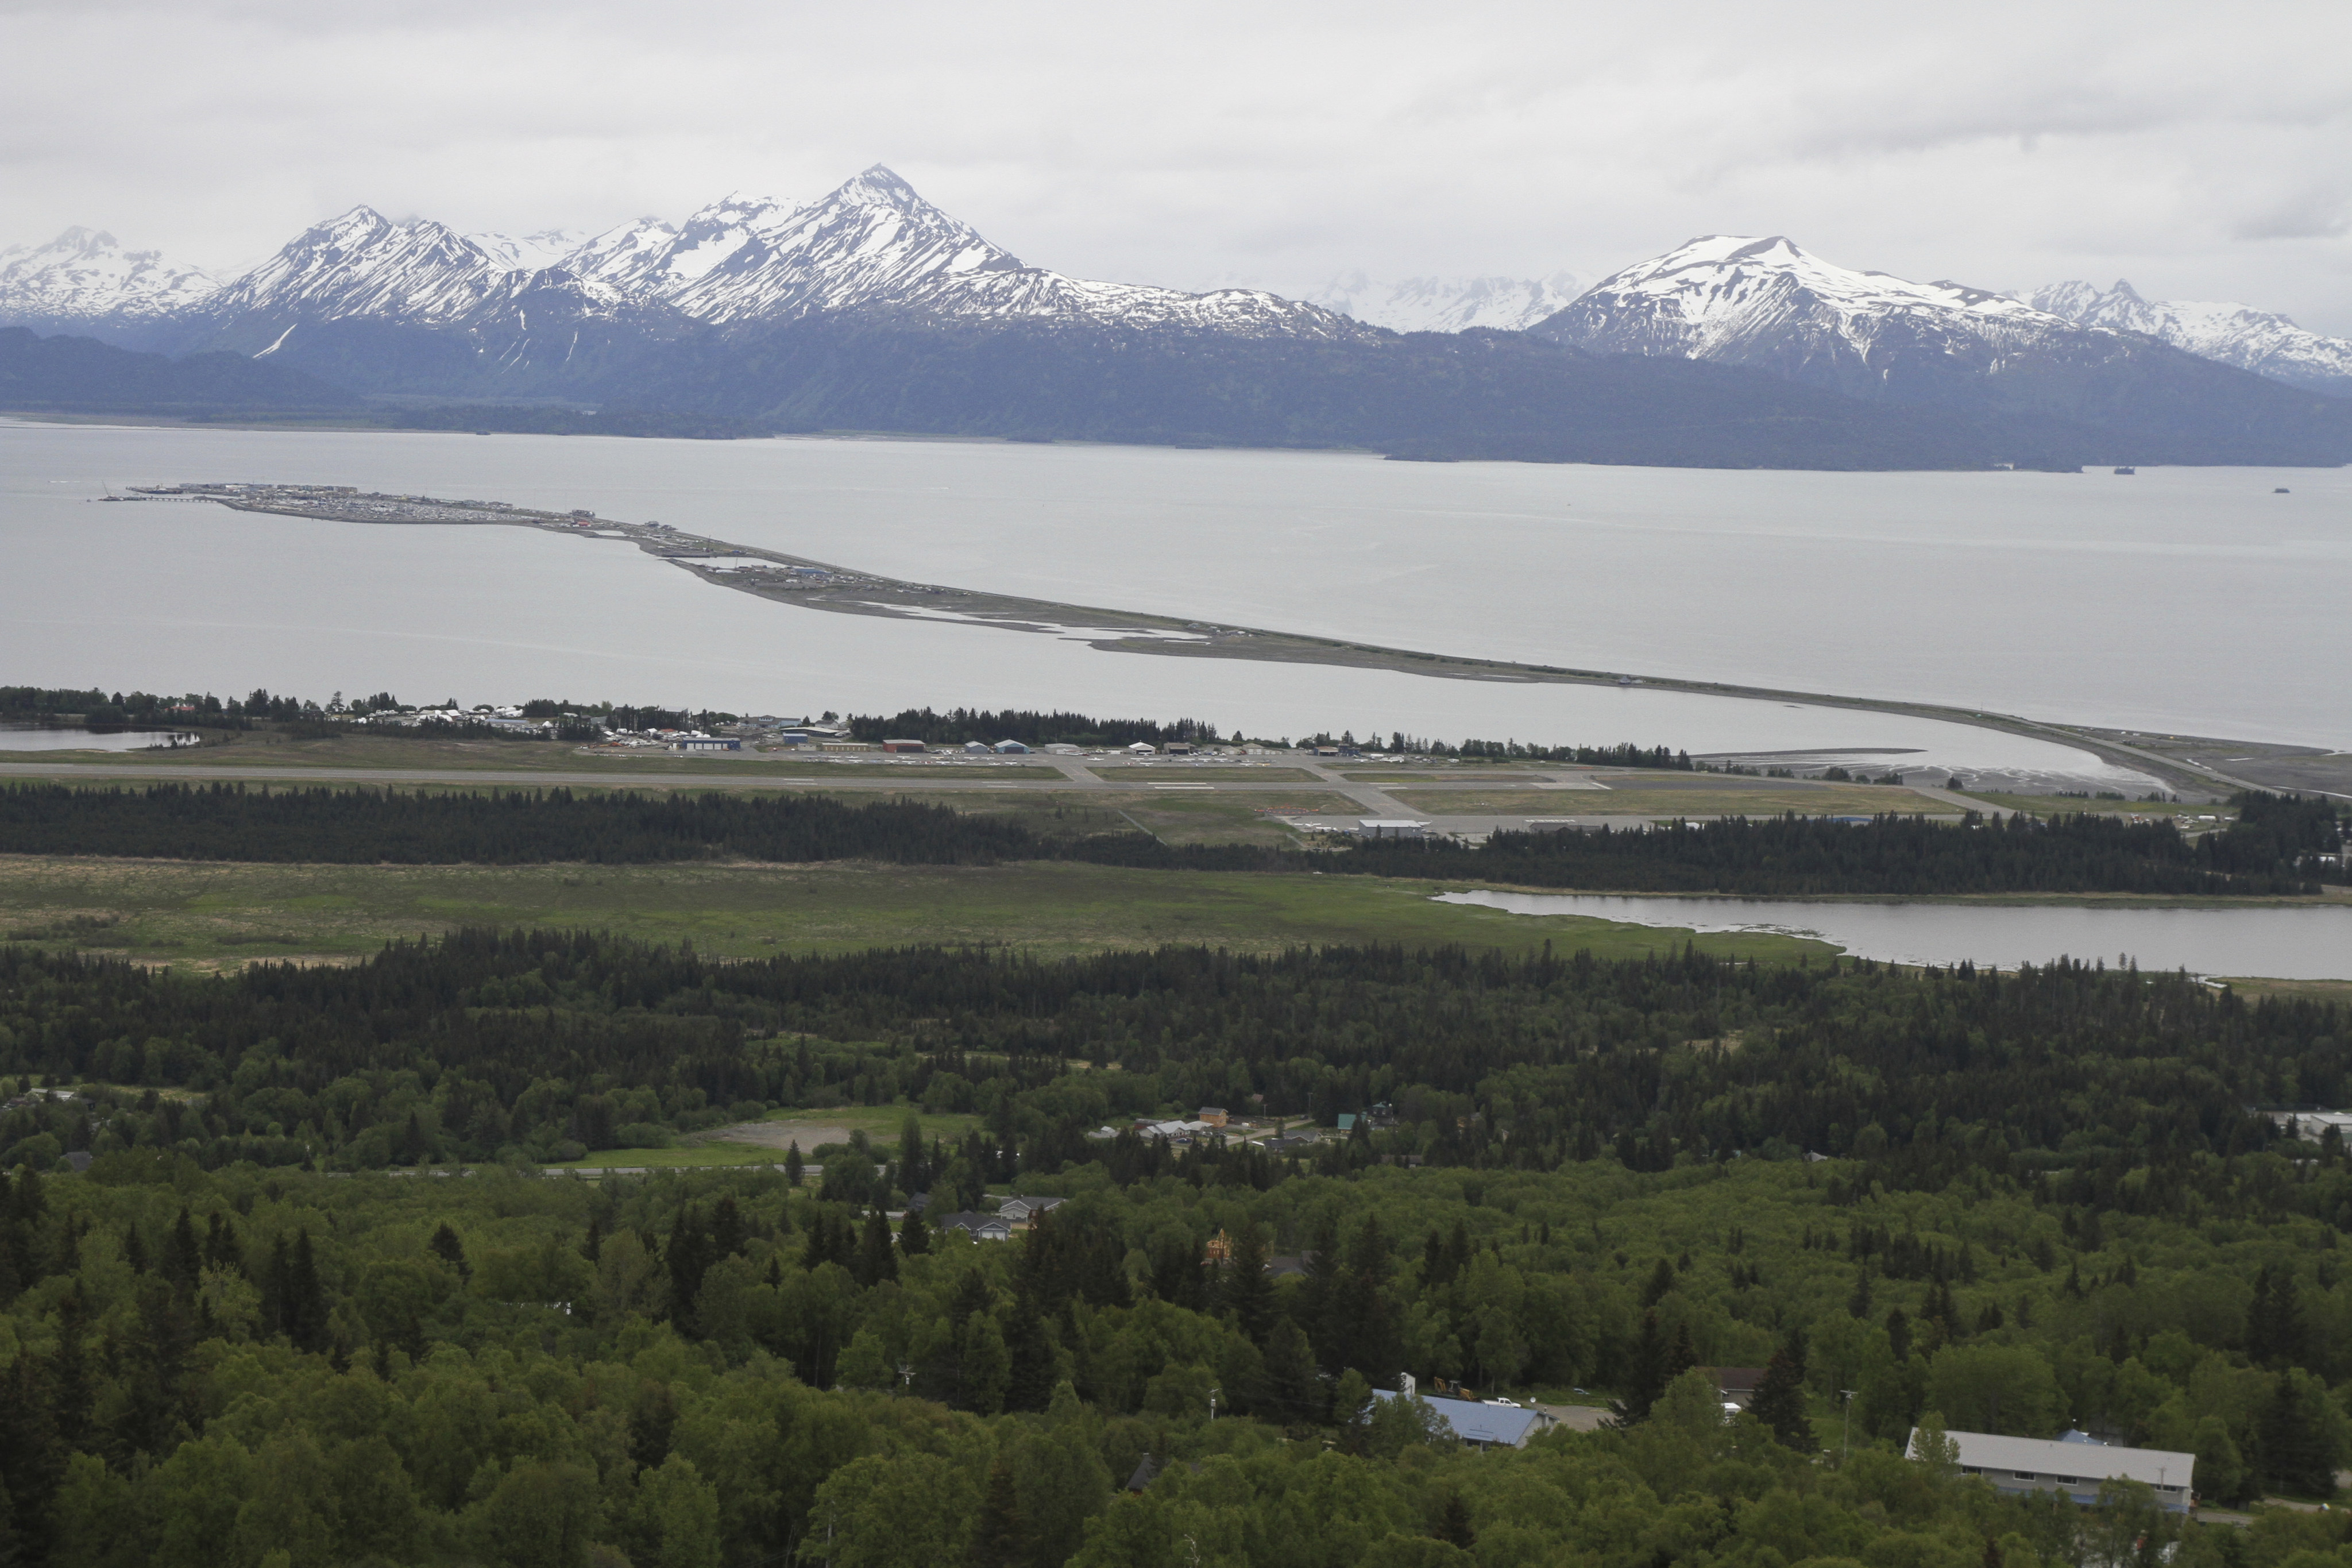 Homer, Alaska. Alaska police said a 70-year-old man was attacked and killed by a moose in Homer on Sunday. Photo: AP